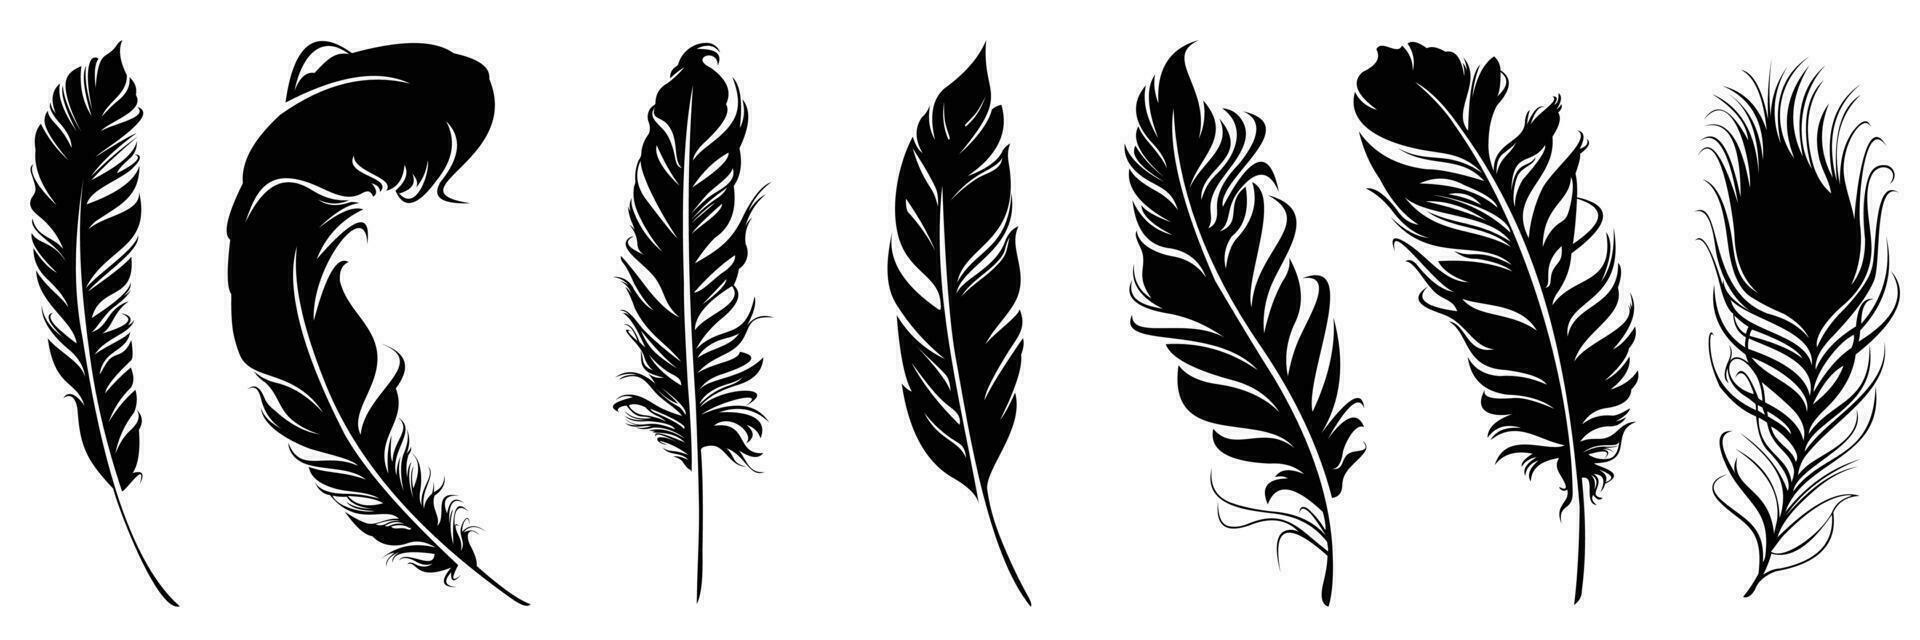 detailed majestic feather collection. various set of feathers illustration vector